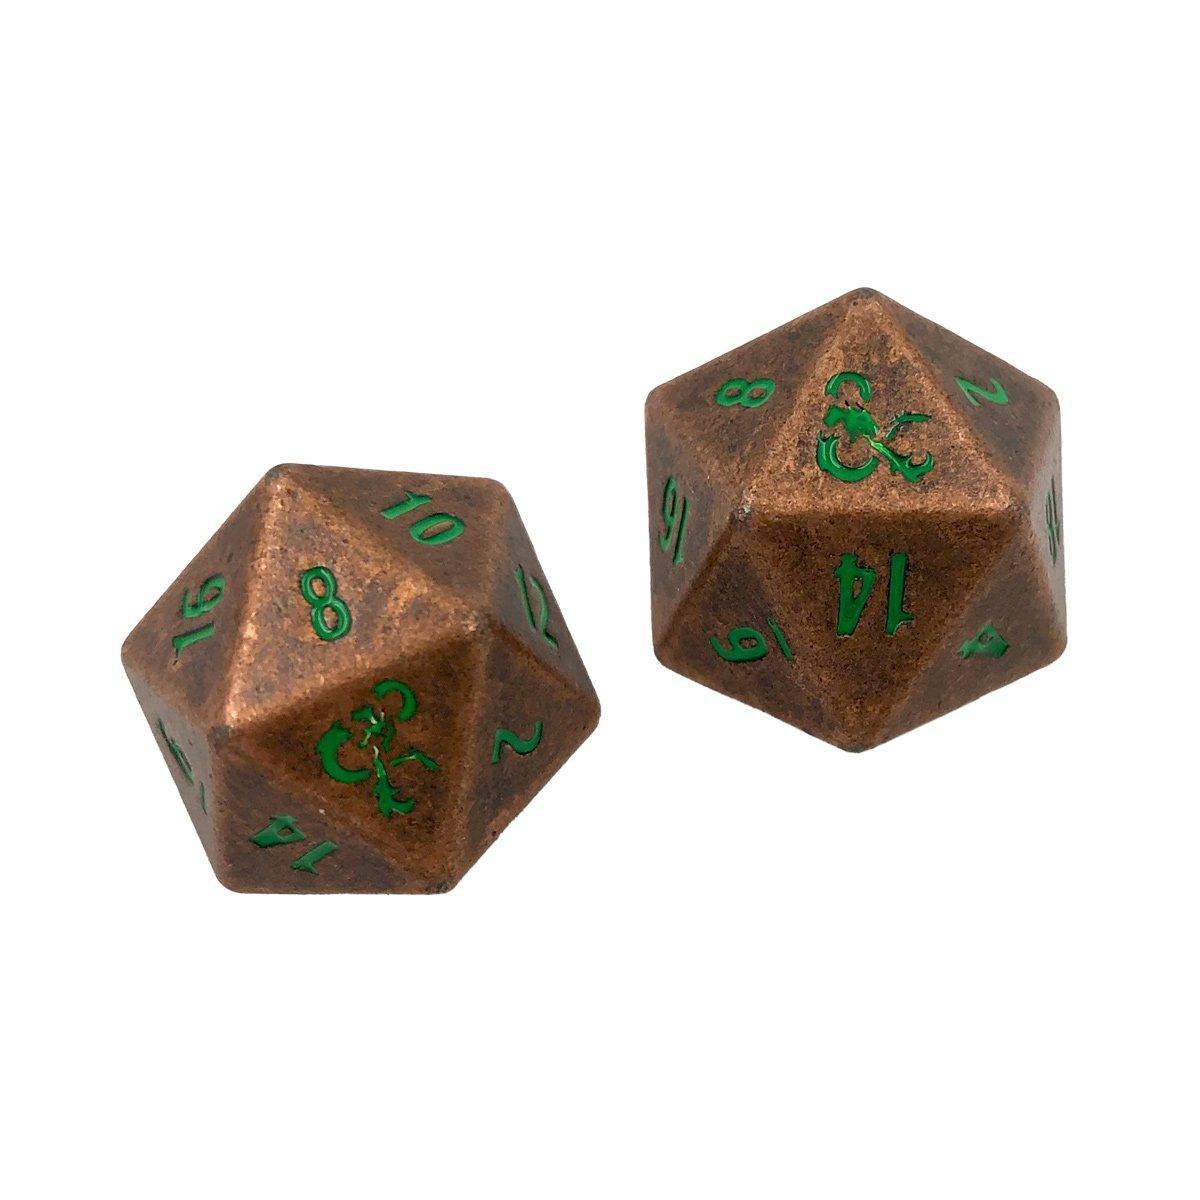 Heavy Metal Feywild Copper and Green D20 Dice Set - ZZGames.dk